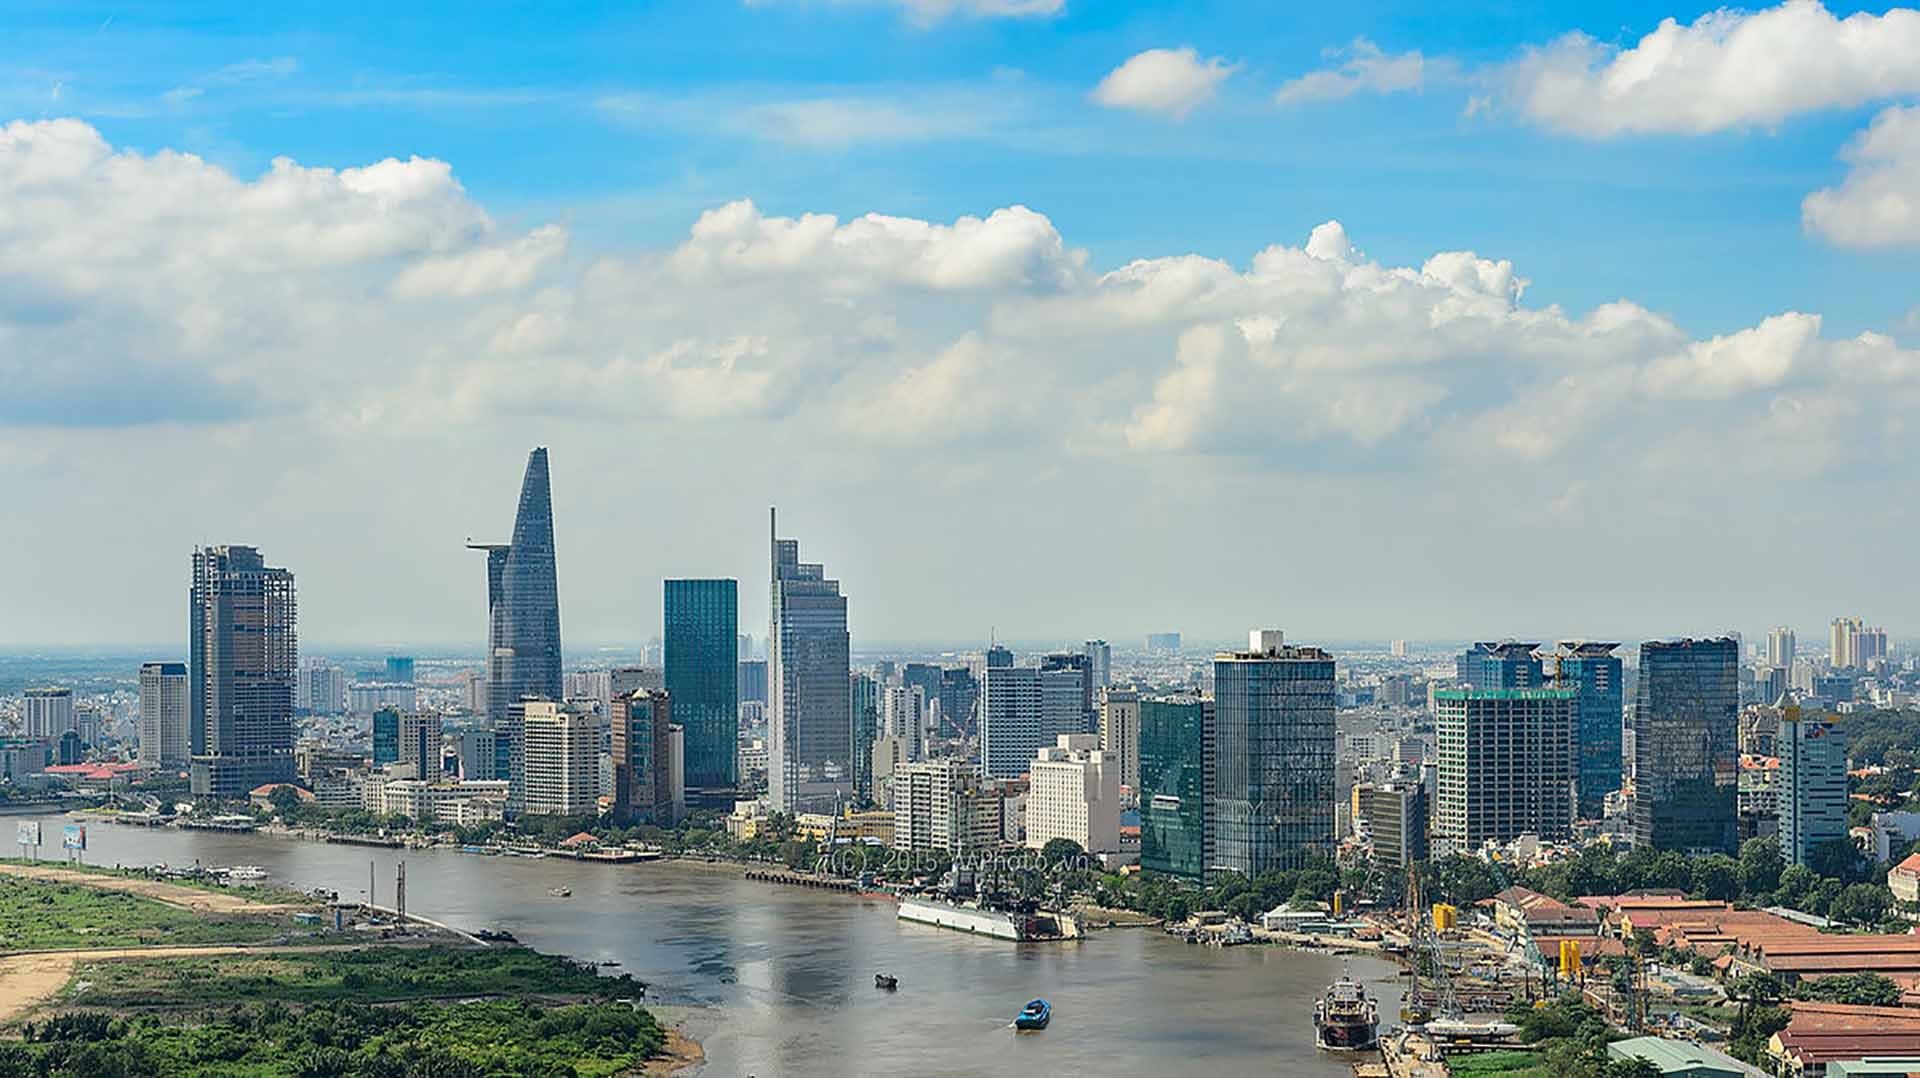 Vietnam aims to become a developing nation by 2030